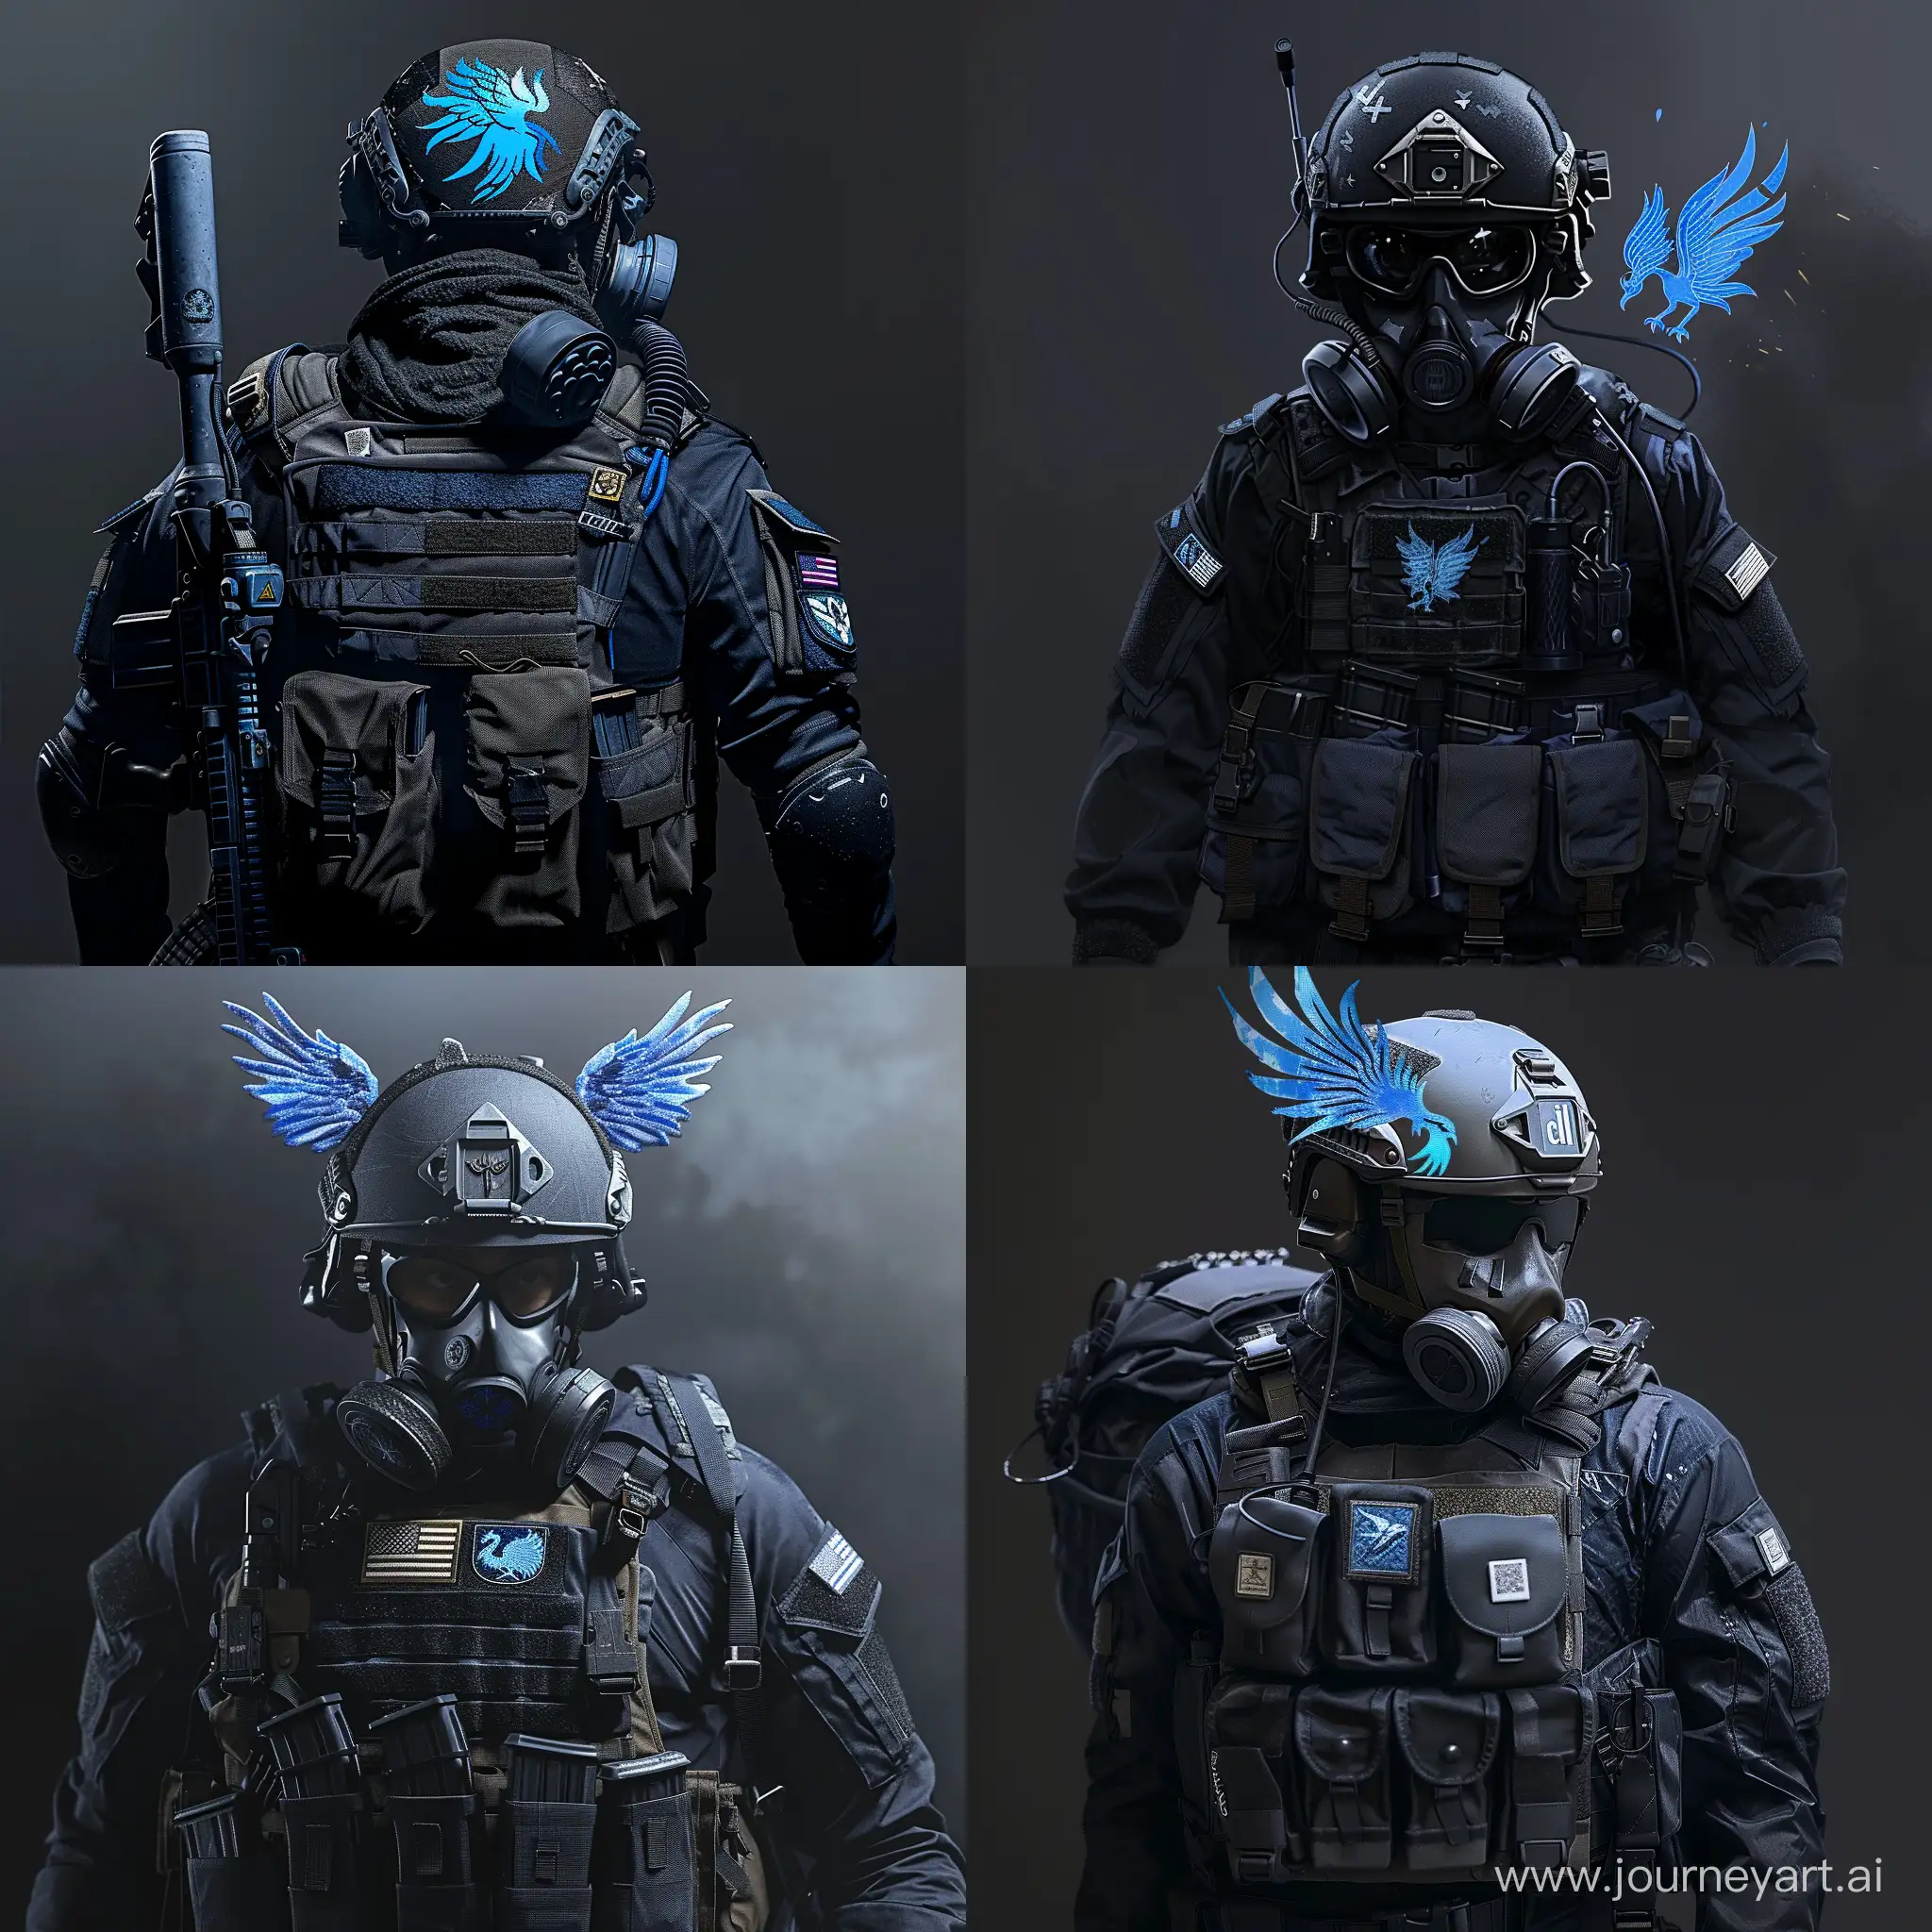 Black-Tactical-Soldier-with-Blue-Phoenix-Patch-and-Gas-Mask